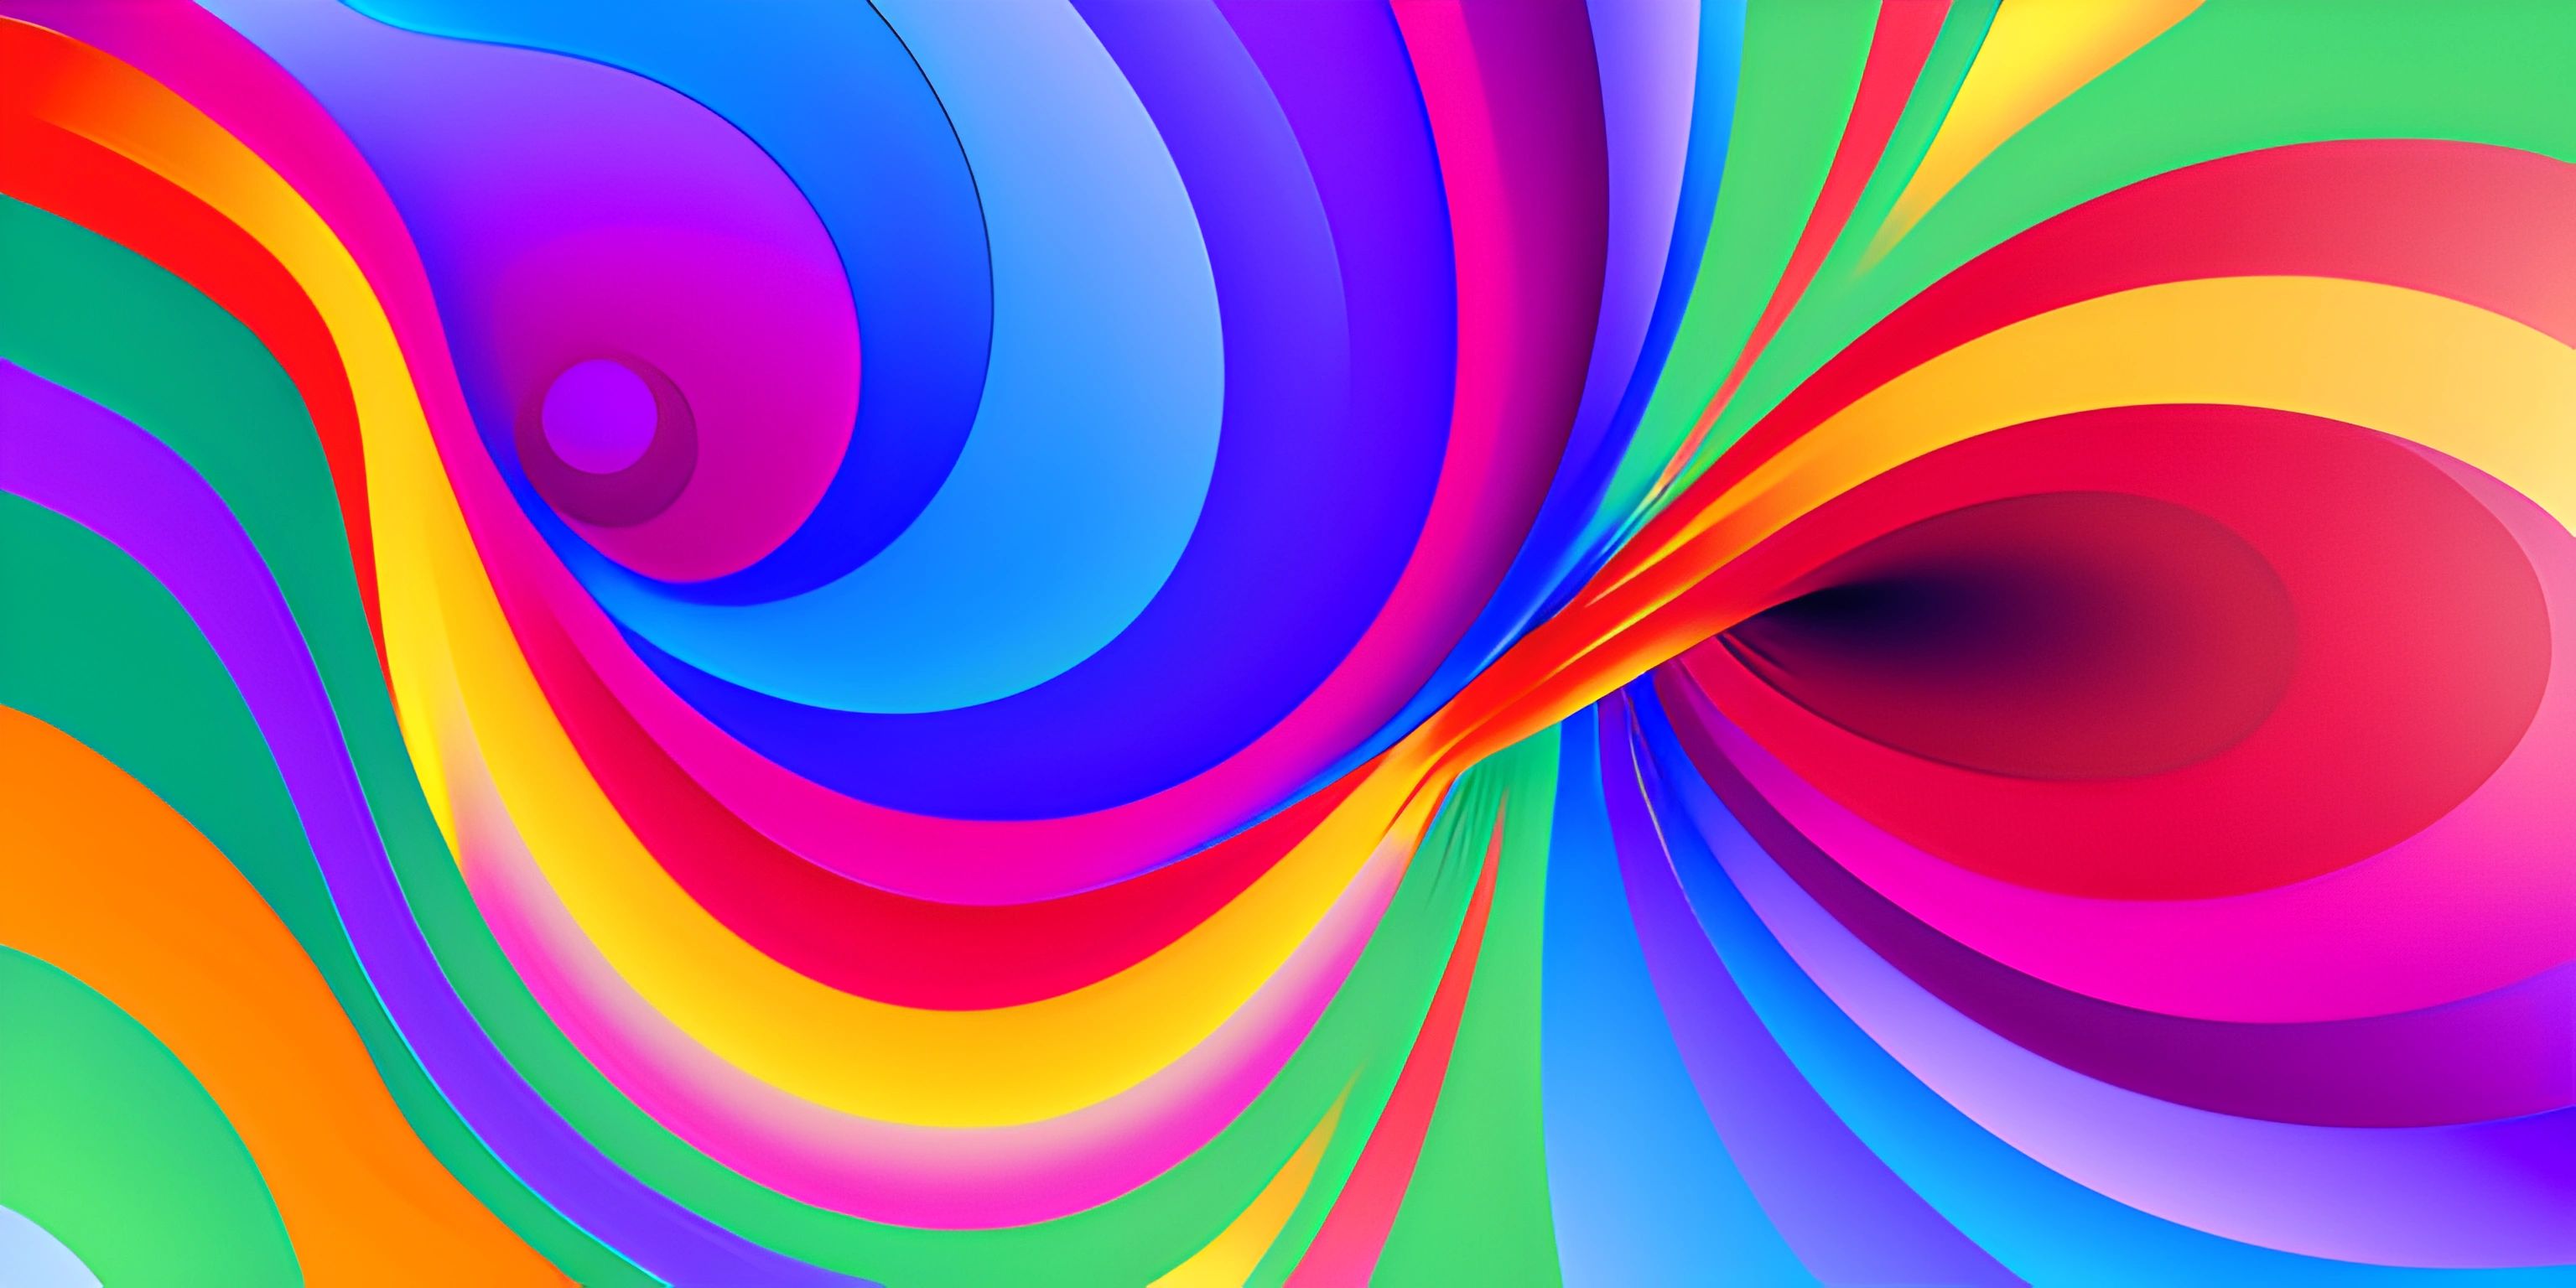 the abstract design of a rainbow swirl is bright and colorful, with several shades of green, orange, red, blue, yellow and white